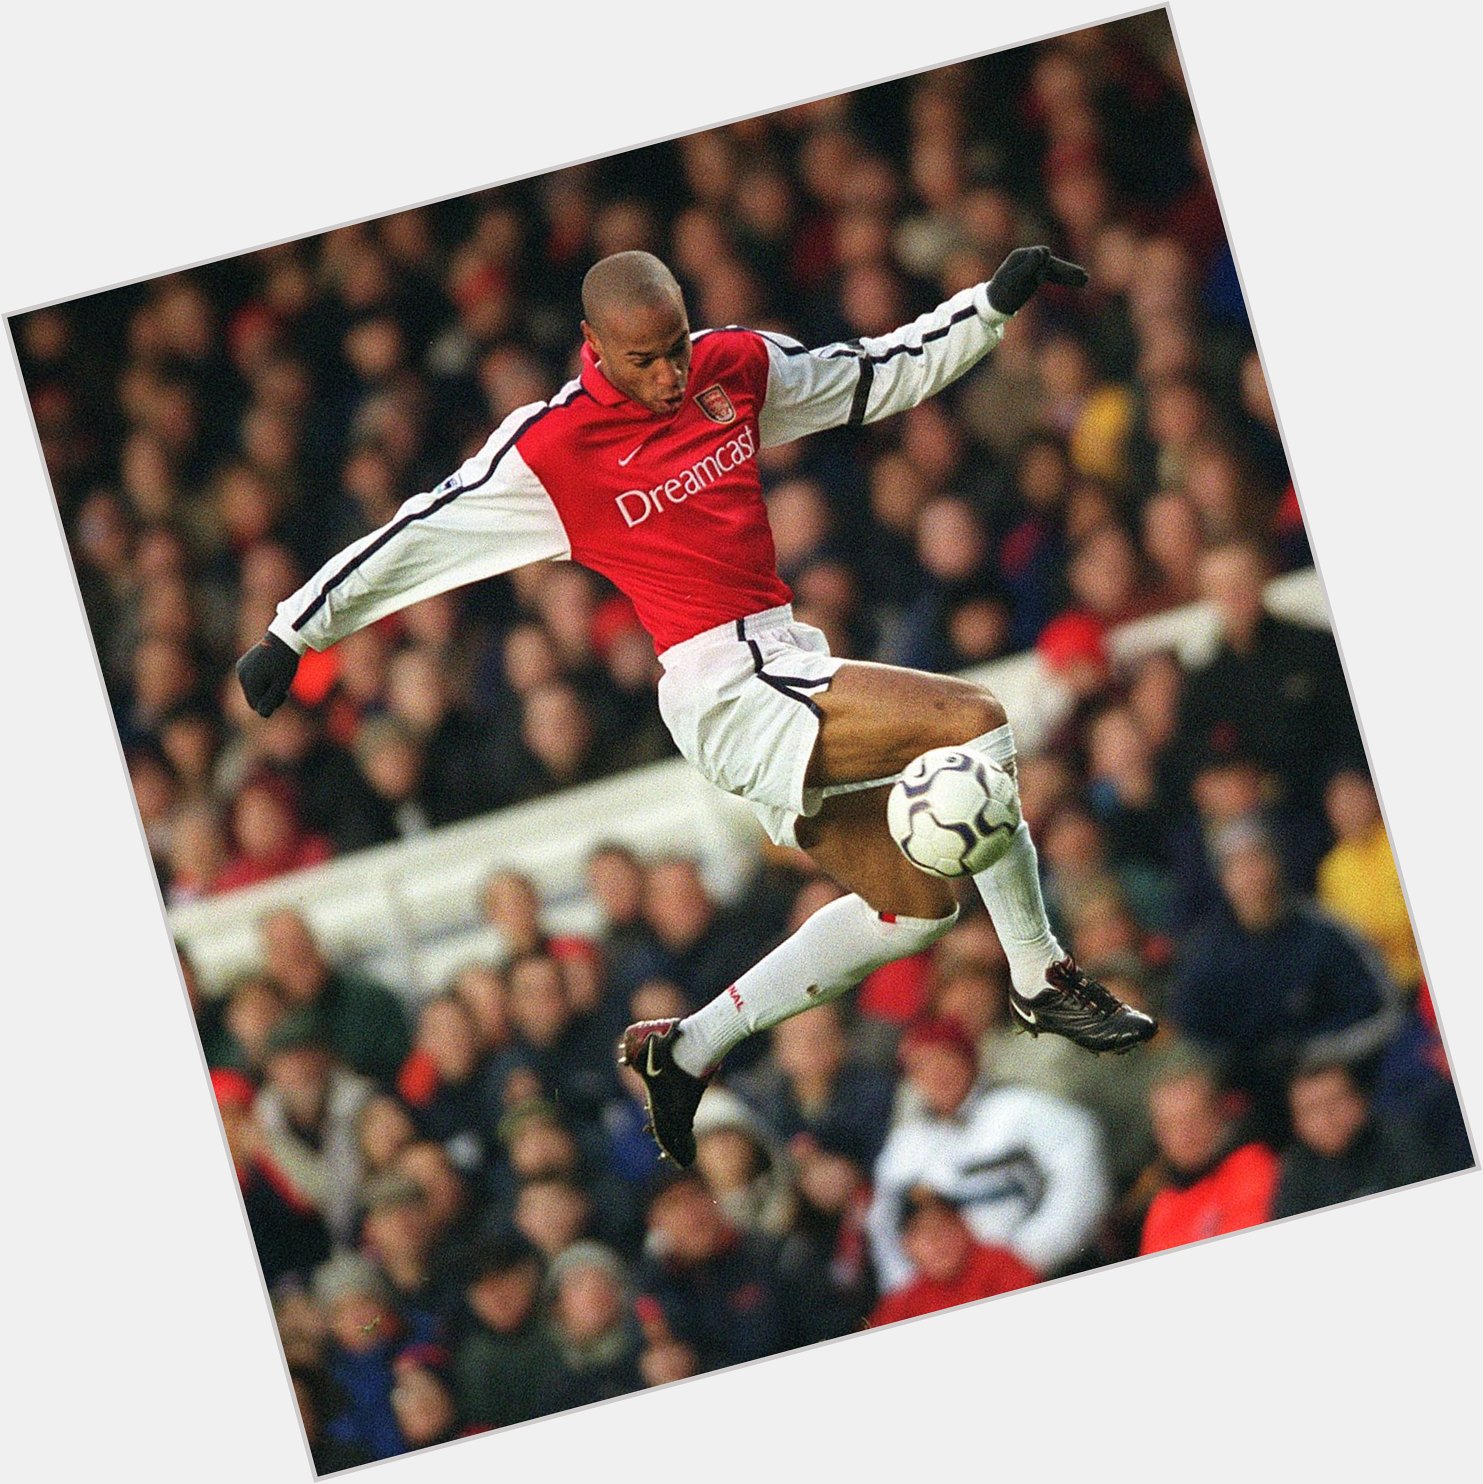 Happy birthday Thierry Henry! One of the best players the has ever seen. 